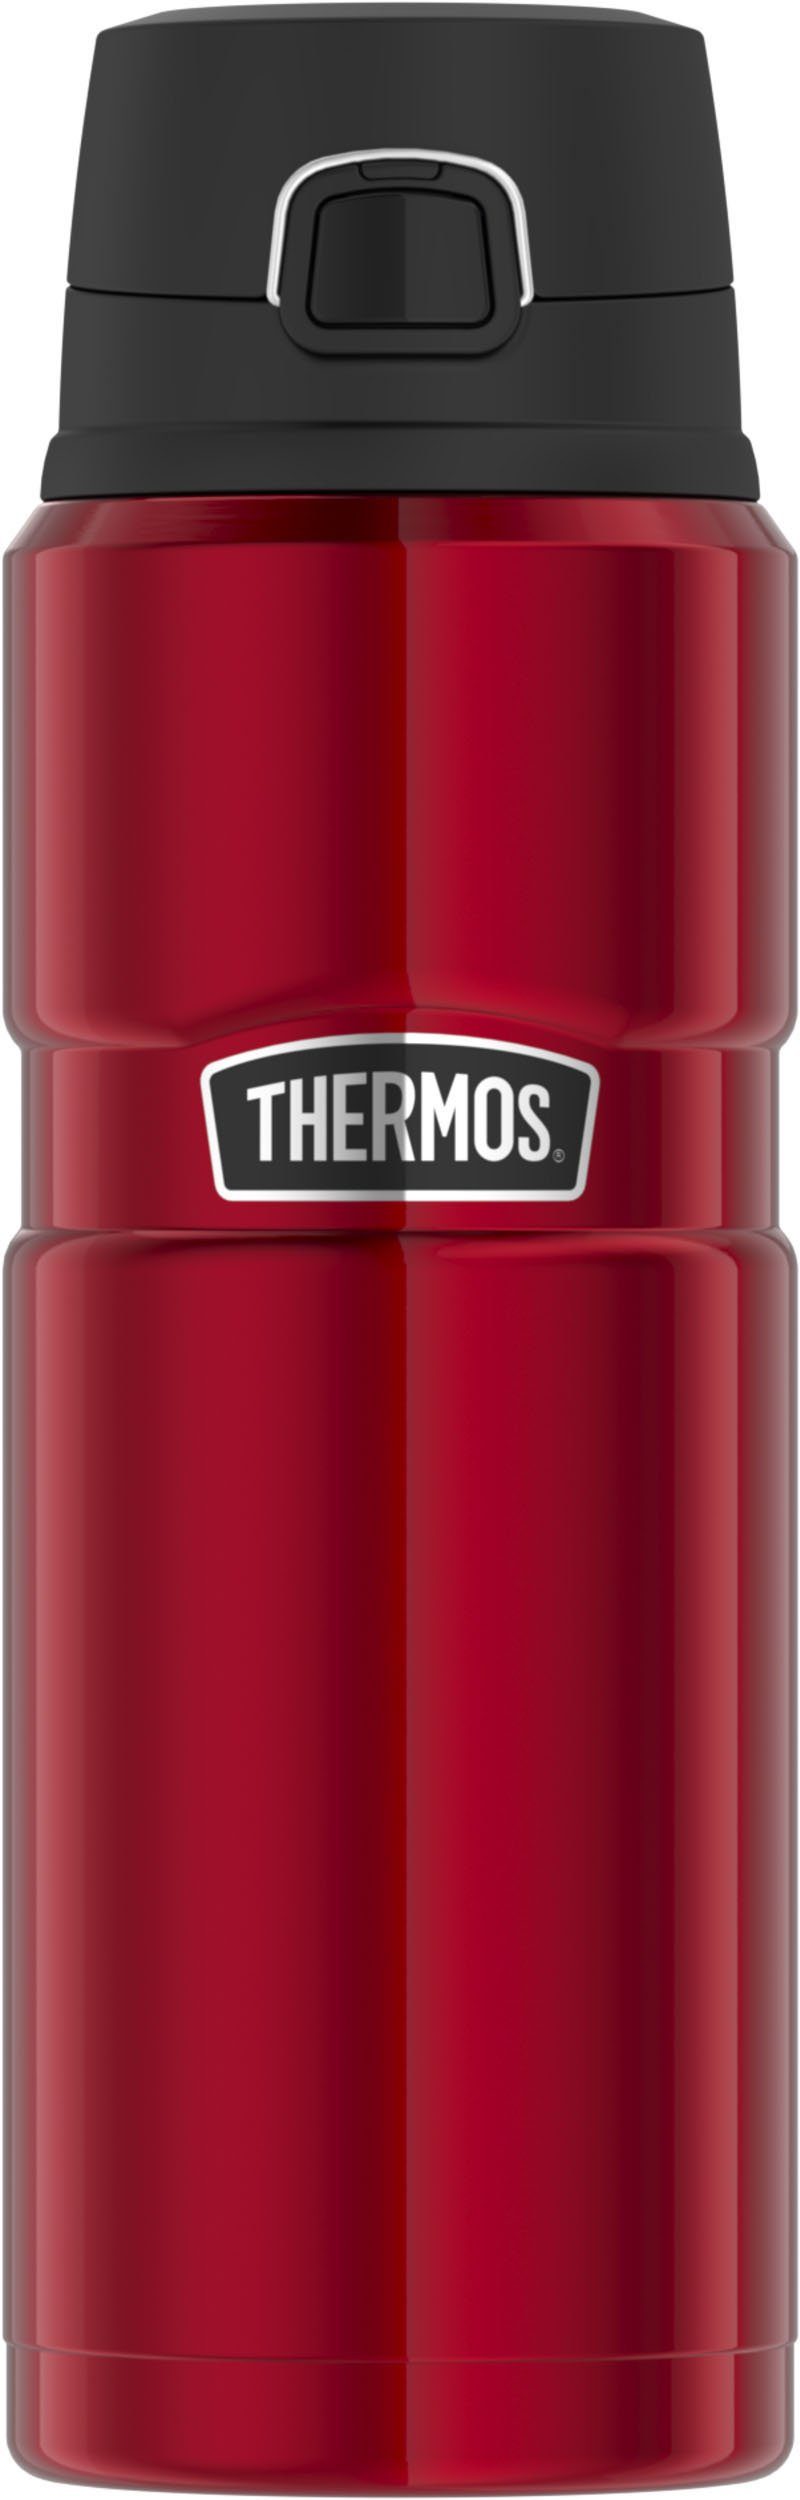 THERMOS Thermoflasche Stainless King, Edelstahl, 0,7 Liter rot